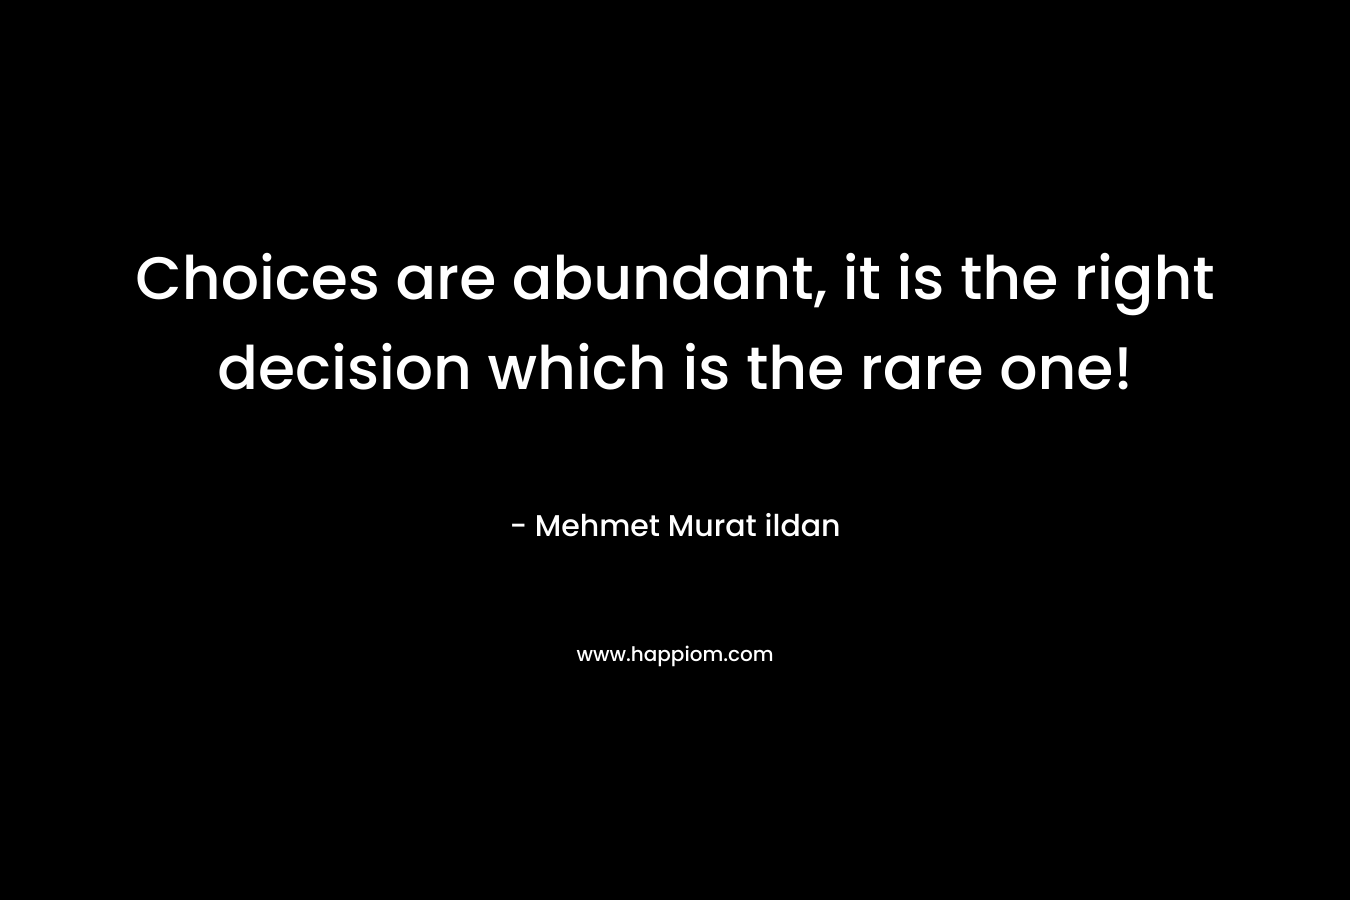 Choices are abundant, it is the right decision which is the rare one! – Mehmet Murat ildan